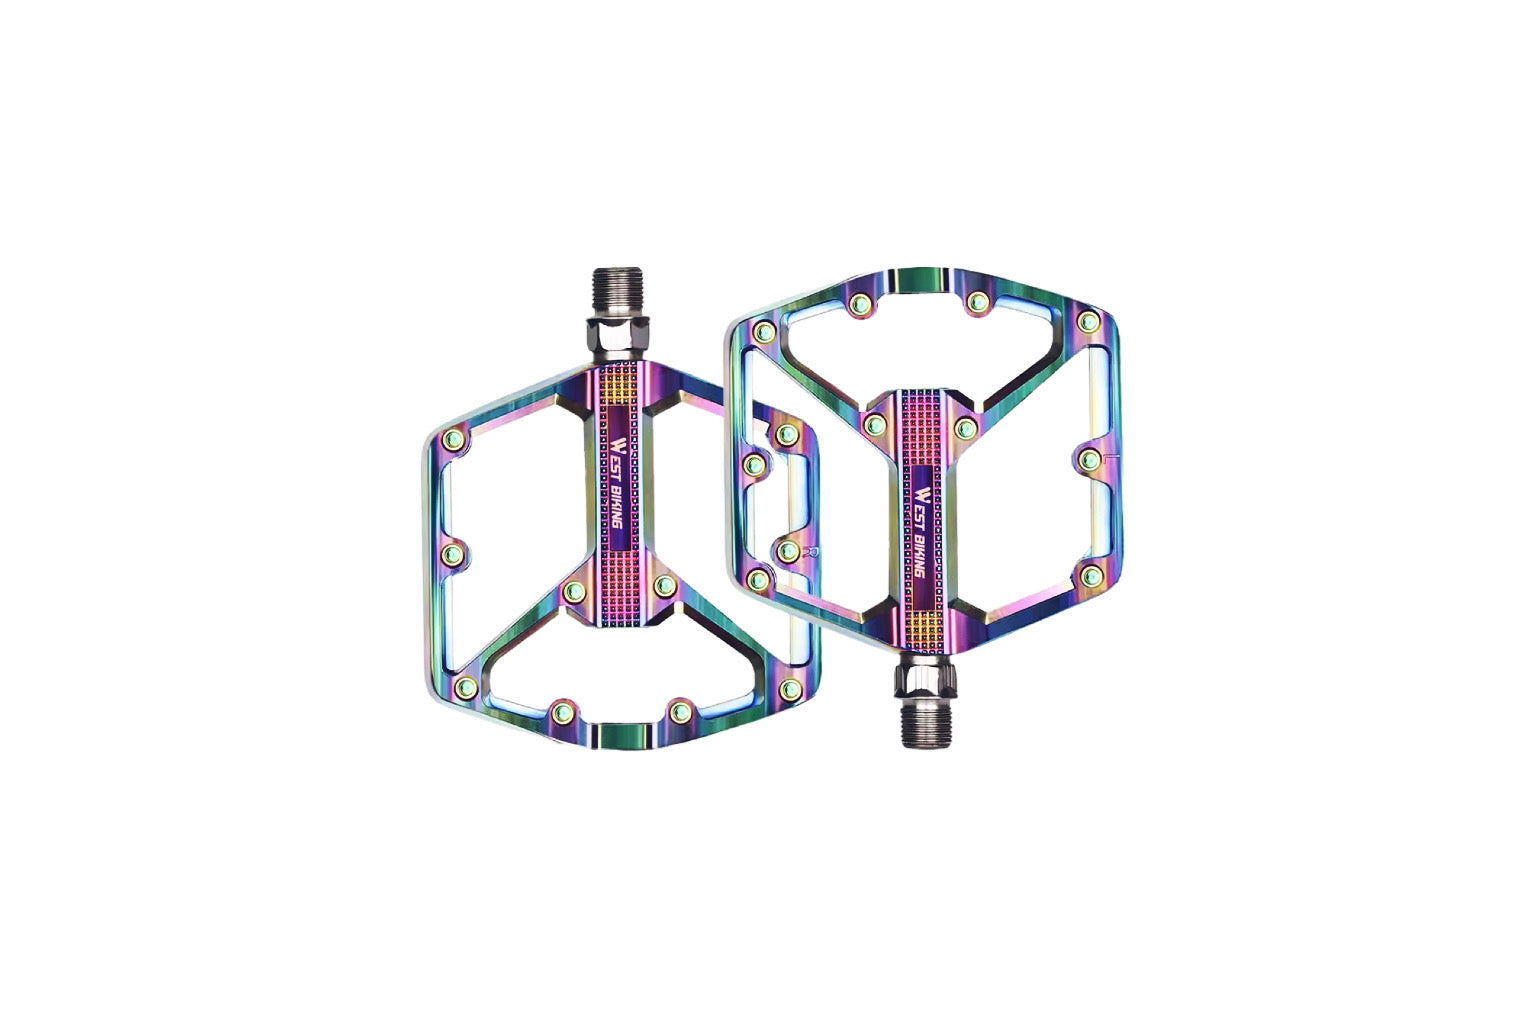 Mountain Bike Pedals with 2 High-Speed DU Sealed Bearings